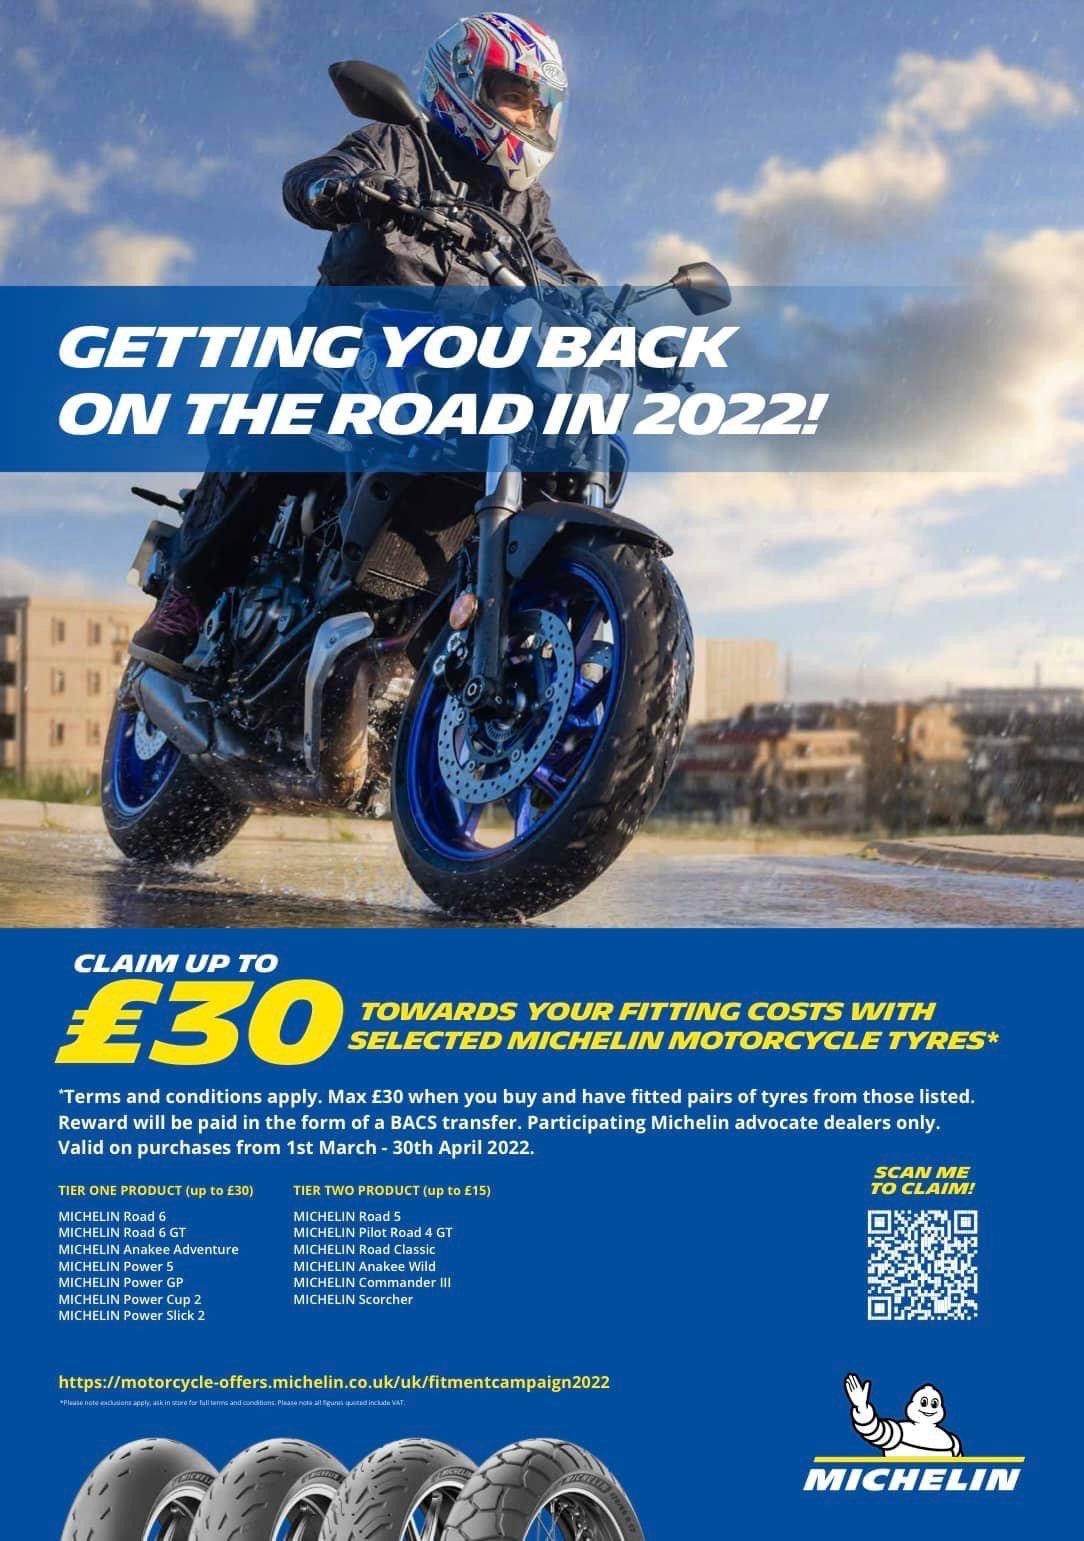 Claim up to £30 back of Michelin motorc